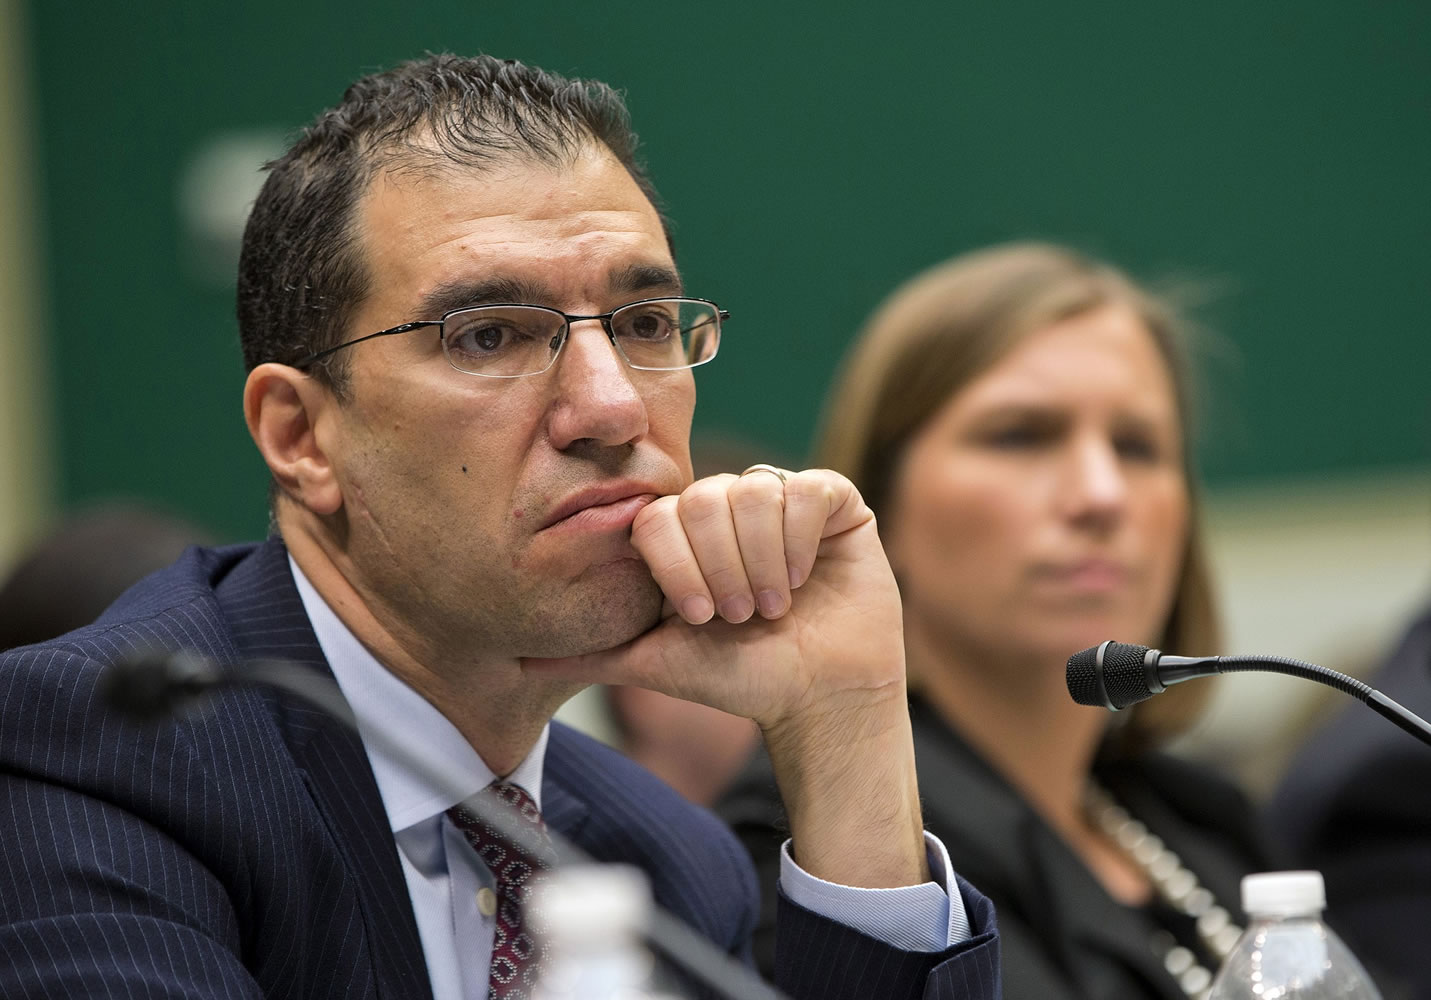 Andrew Slavitt, group executive vice president for Optum/QSSI, left, and Lynn Spellecy, corporate counsel for Equifax Workforce Solutions, listen to questioning during a House Energy and Commerce Committee hearing with contractors that built the federal government's health care websites in Washington.